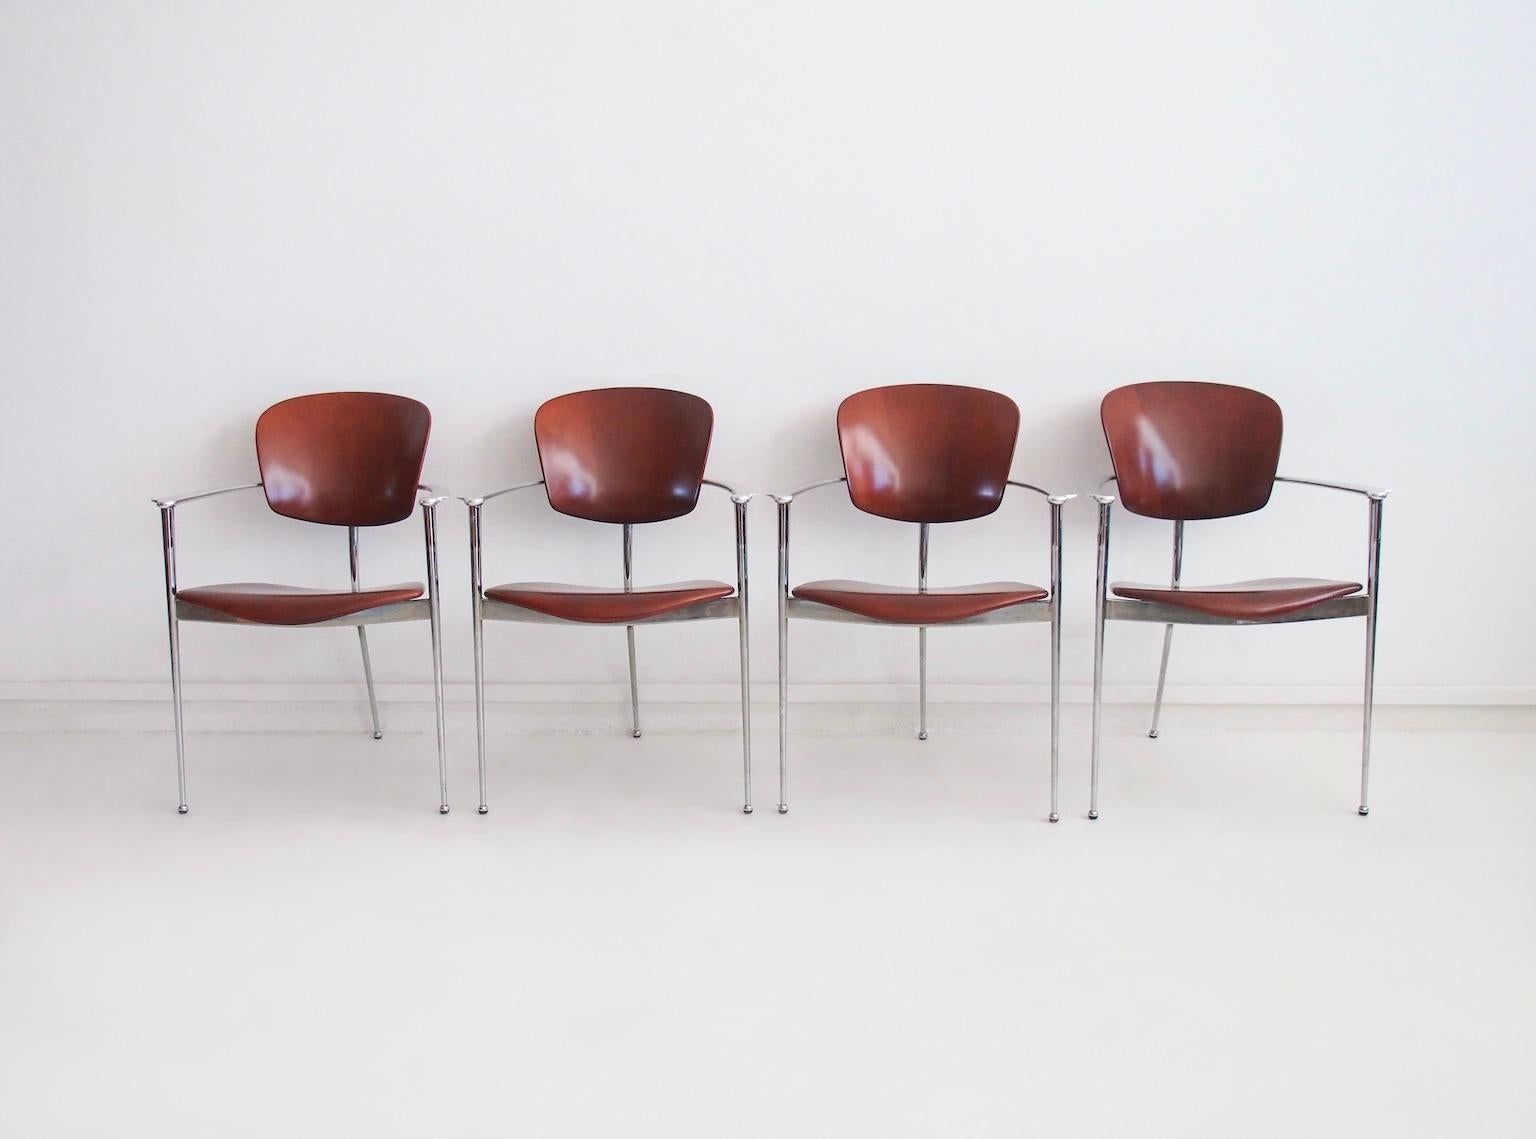 Set of four sculptural chairs, model Andrea, designed in 1986 by Josep Lluscà (Barcelona, 1948) for Andreu World. The Andrea chair was born more than thirty years ago when Josep Llusca successfully tested a solution to the problems of stability of a